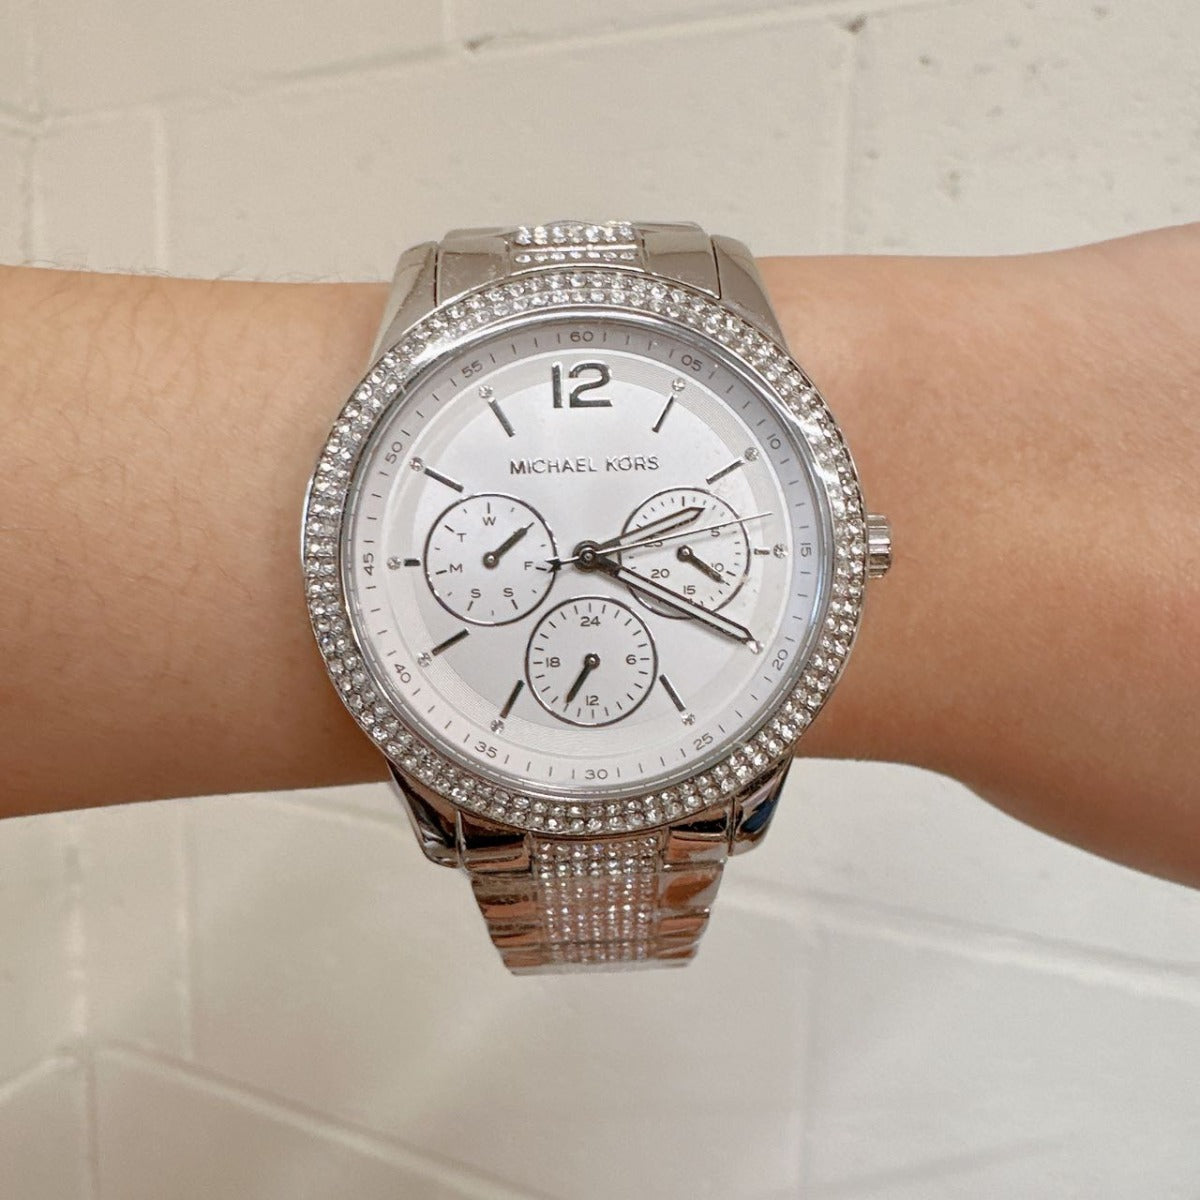 Michael Kors MK7294 Tibby Crystals Silver Tone Multifunction Watch - 796483584518